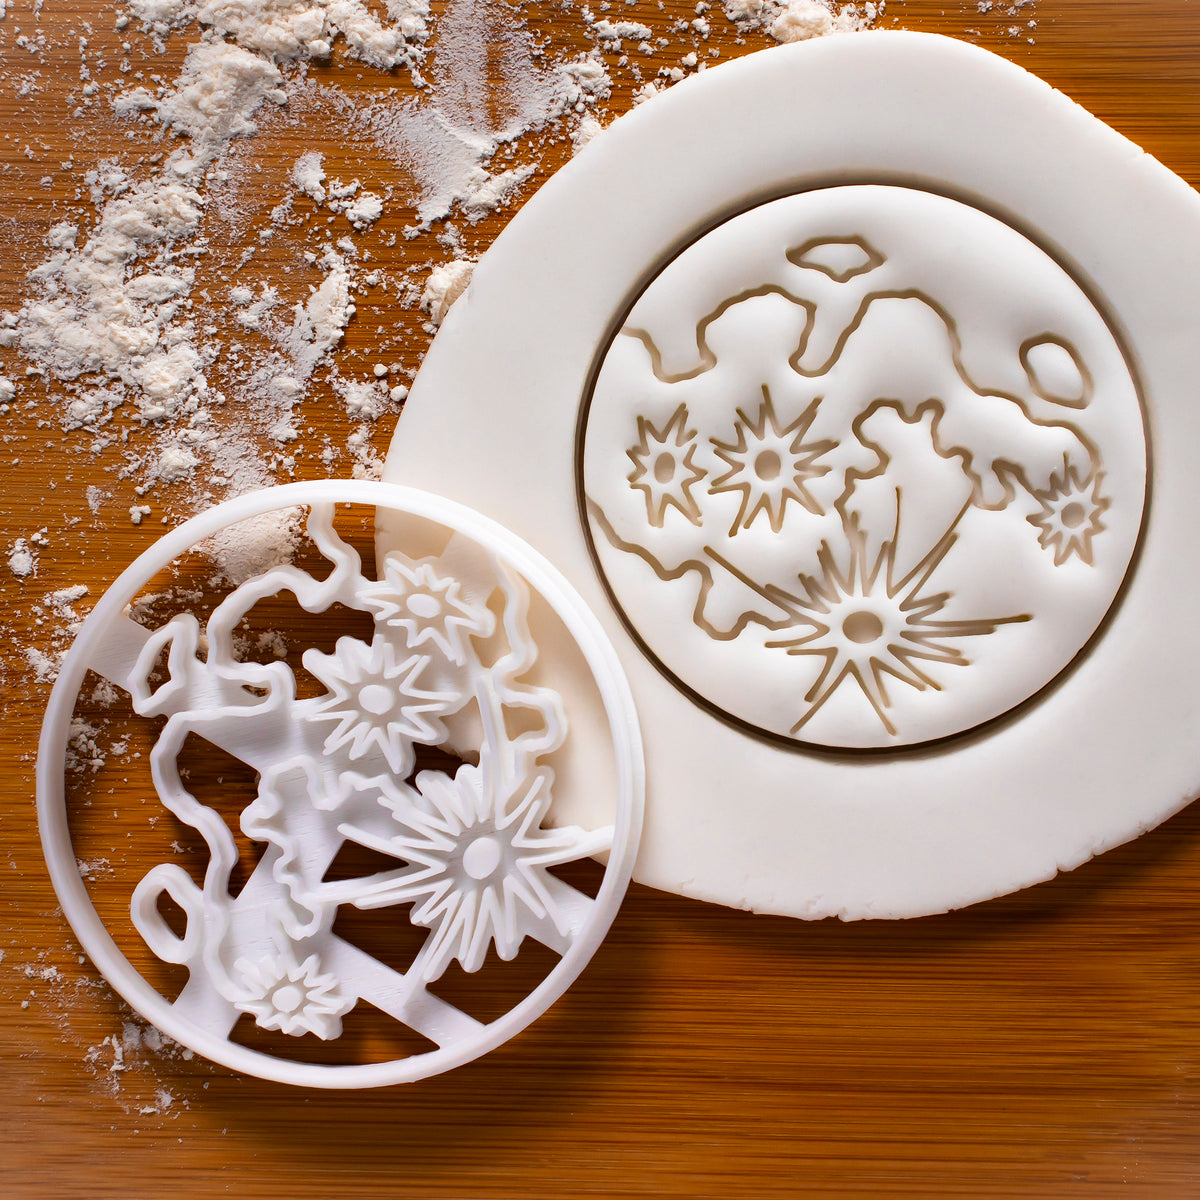 Moon Craters Cookie Cutter